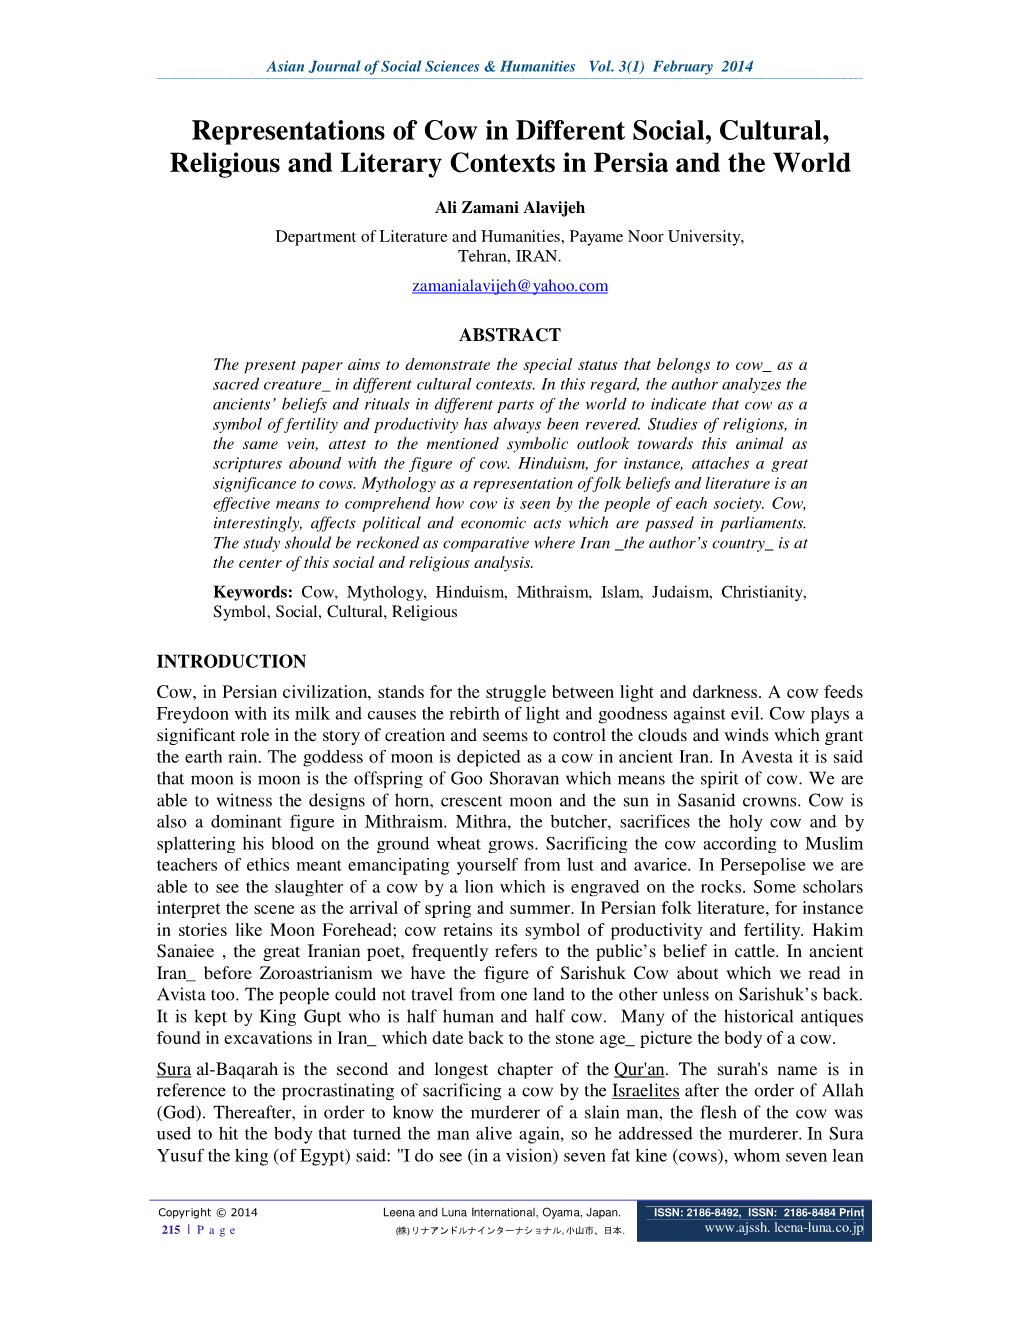 Representations of Cow in Different Social, Cultural, Religious and Literary Contexts in Persia and the World